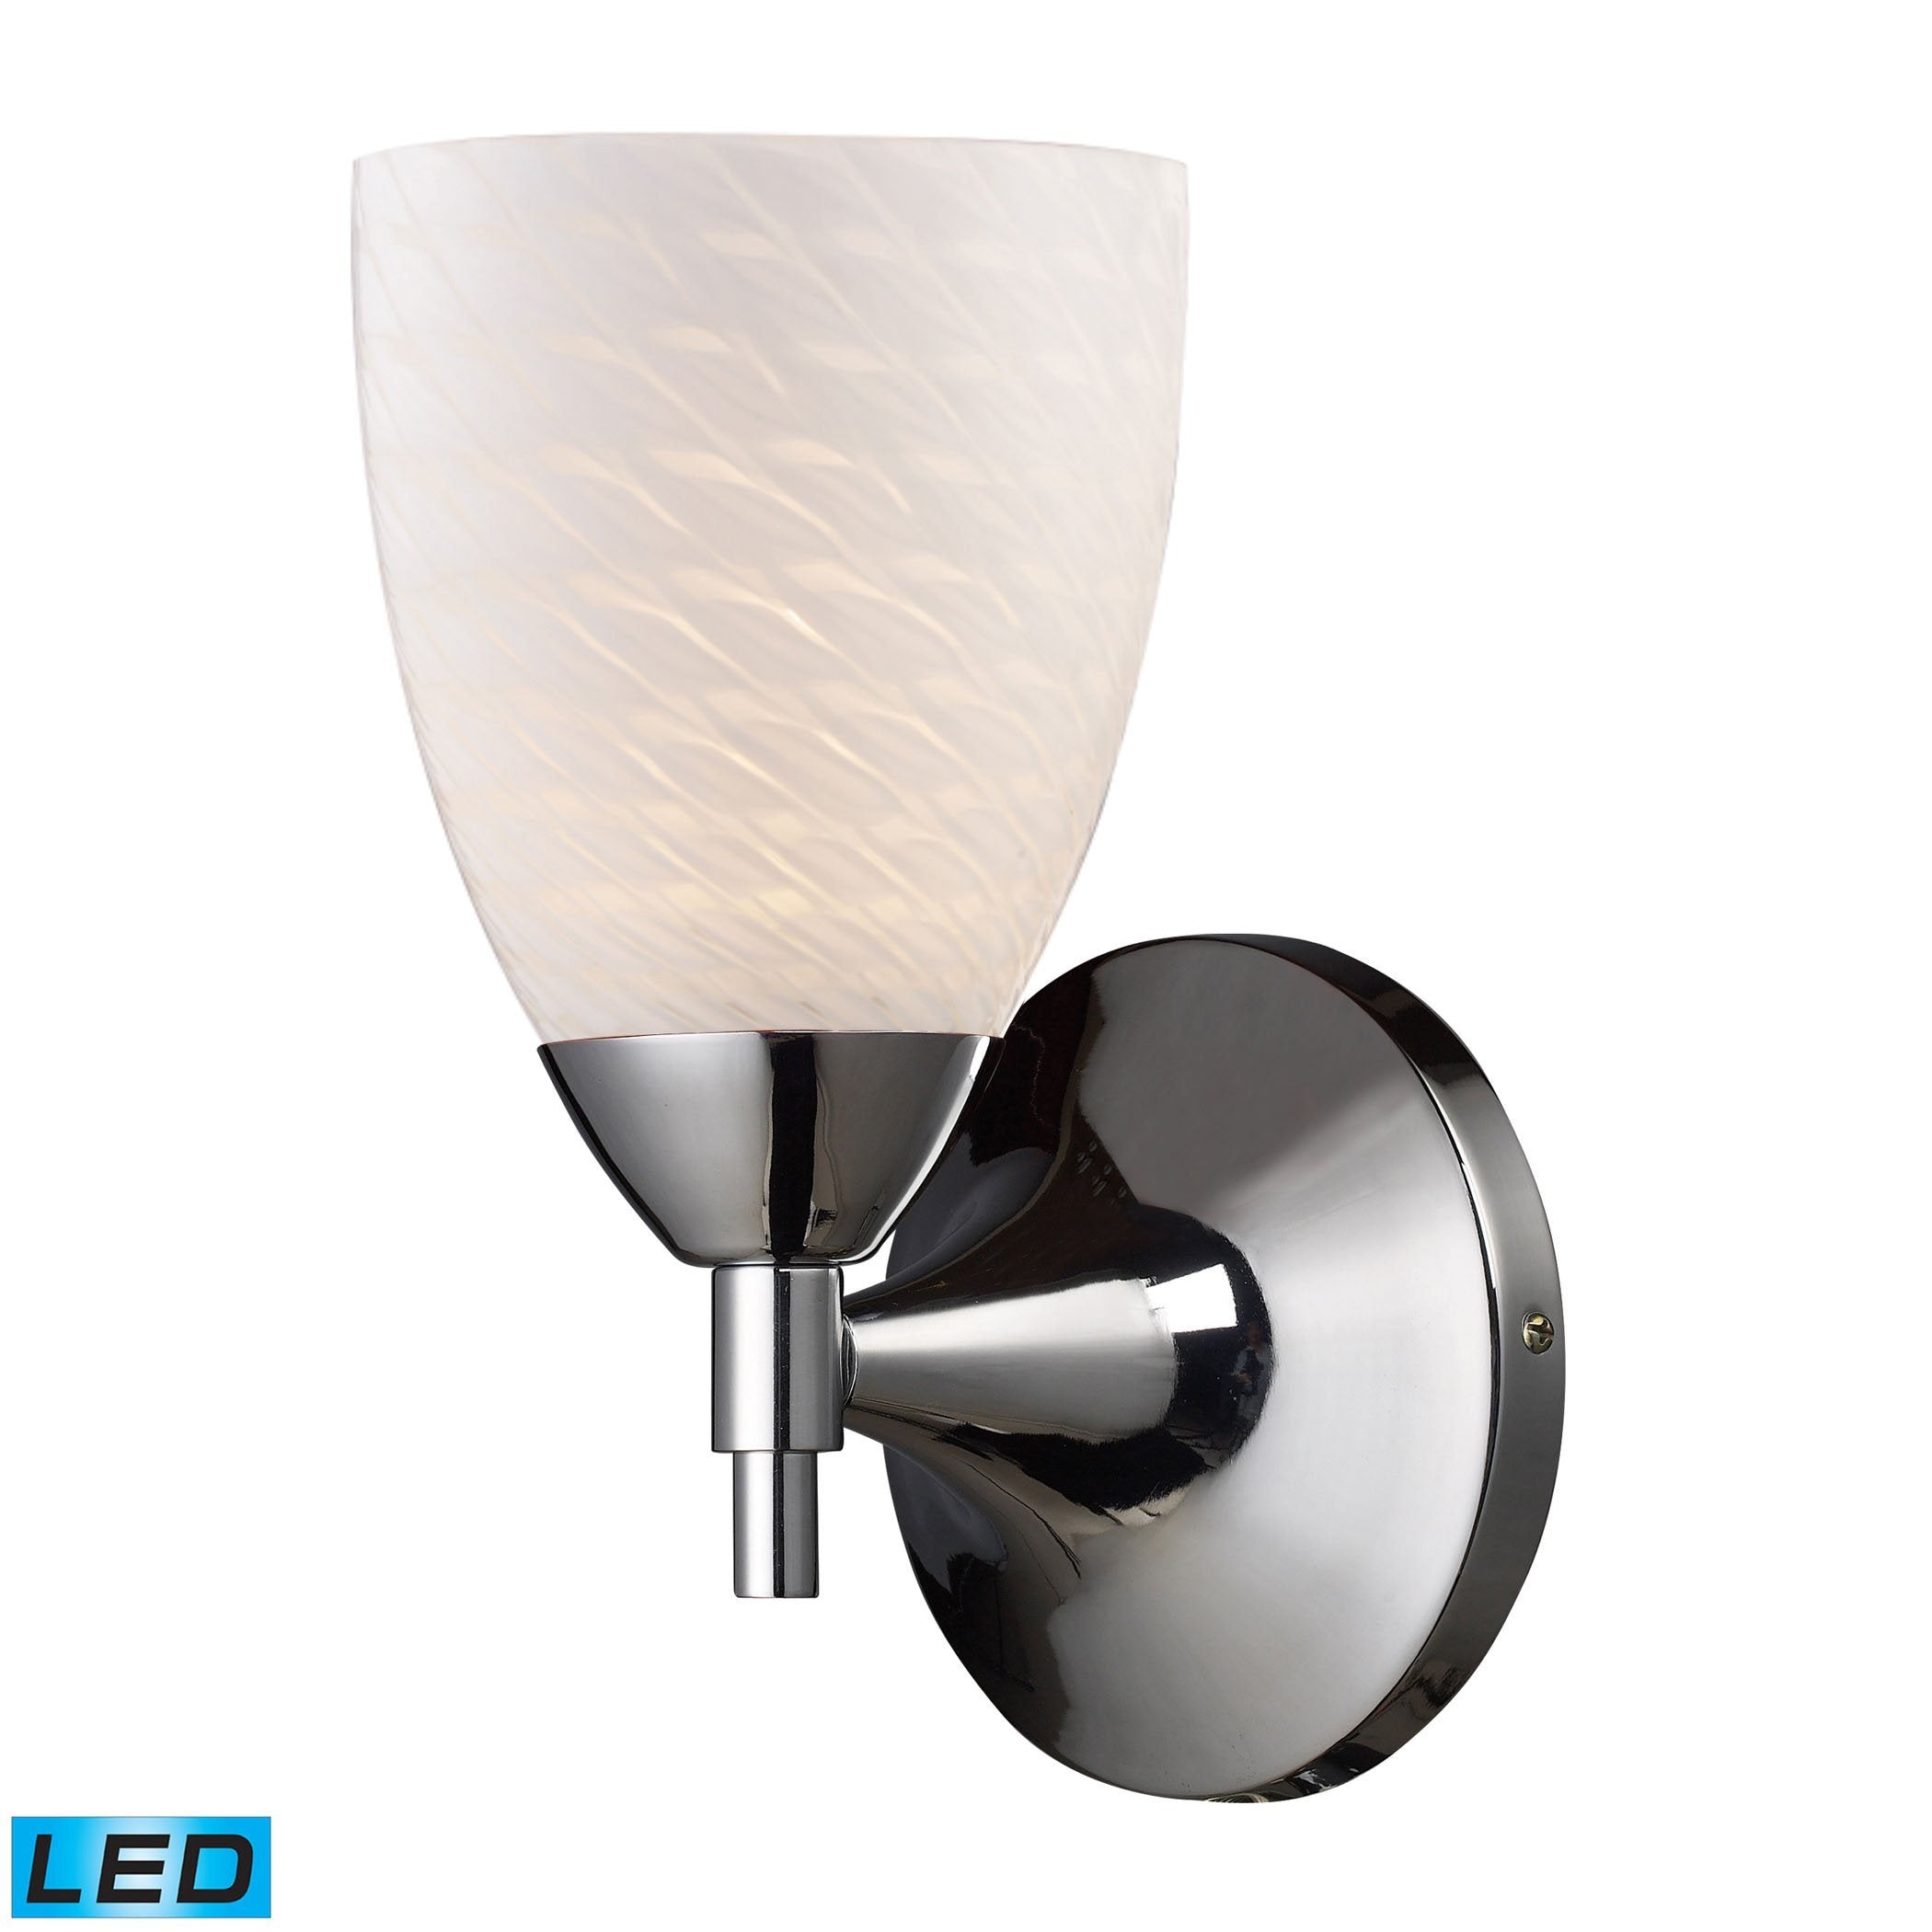 Celina 1 Light LED Sconce In Polished Chrome And White Swirl Glass Wall Sconce Elk Lighting 